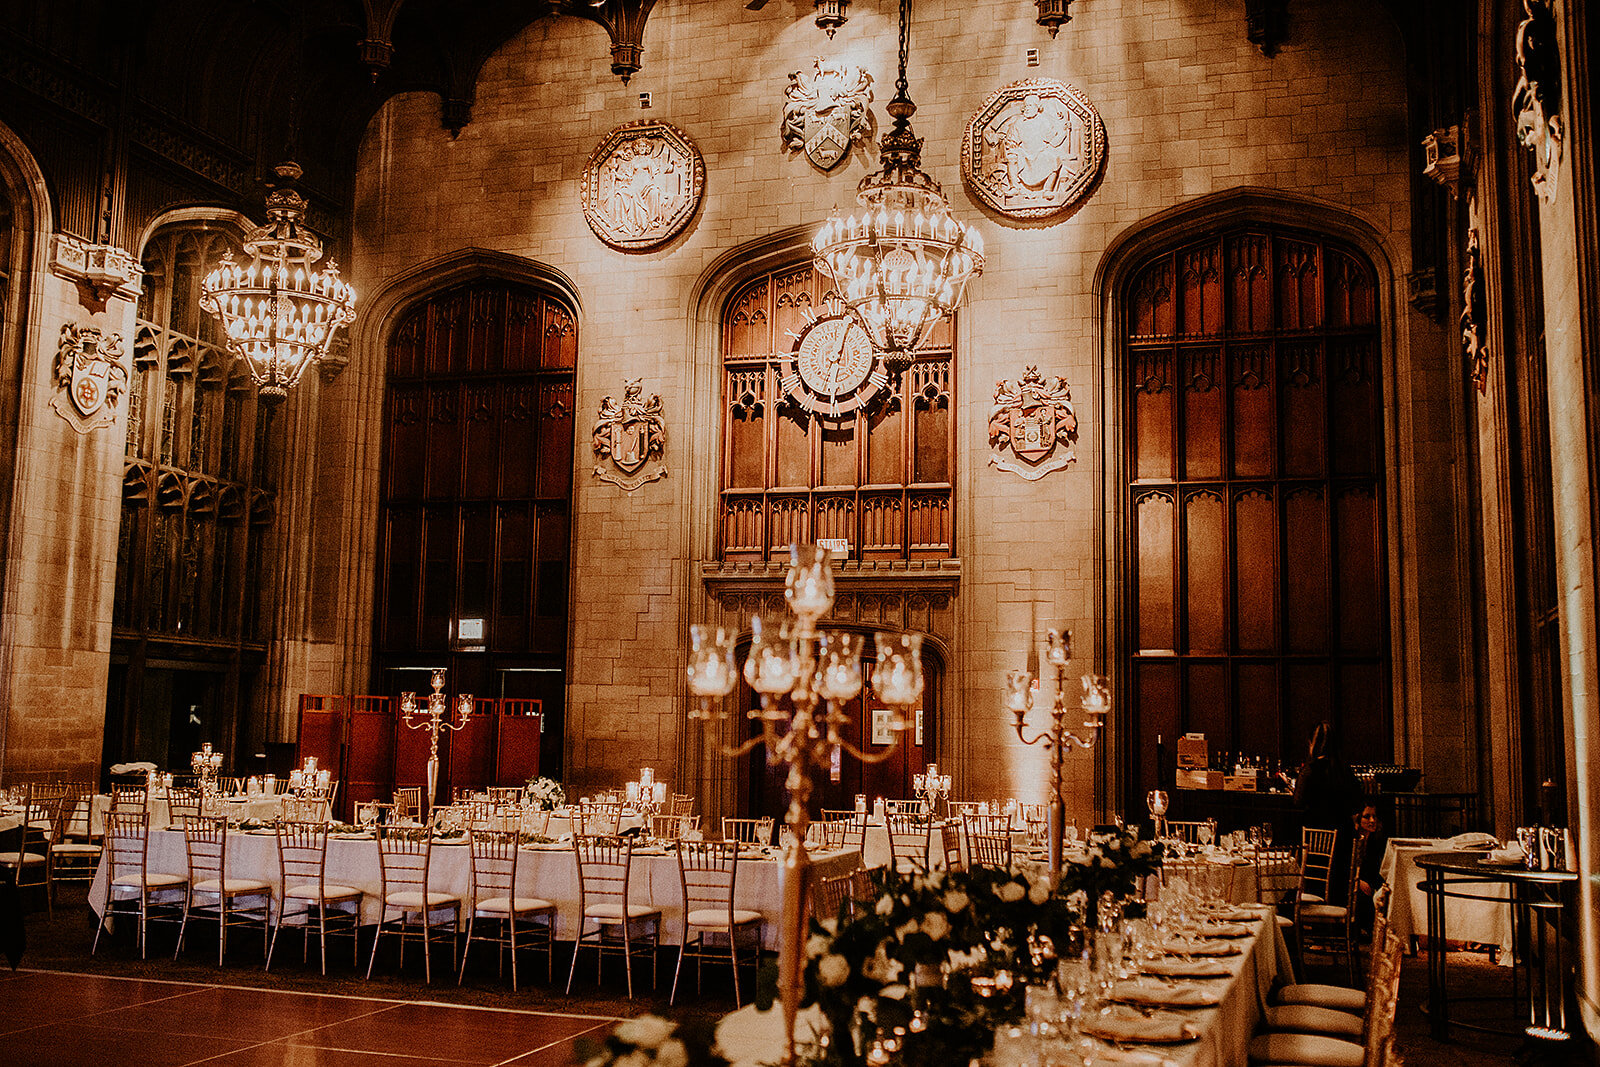 Dreamy Winter Wedding at University Club Chicago by The Simply Elegant Group featured on CHI thee WED